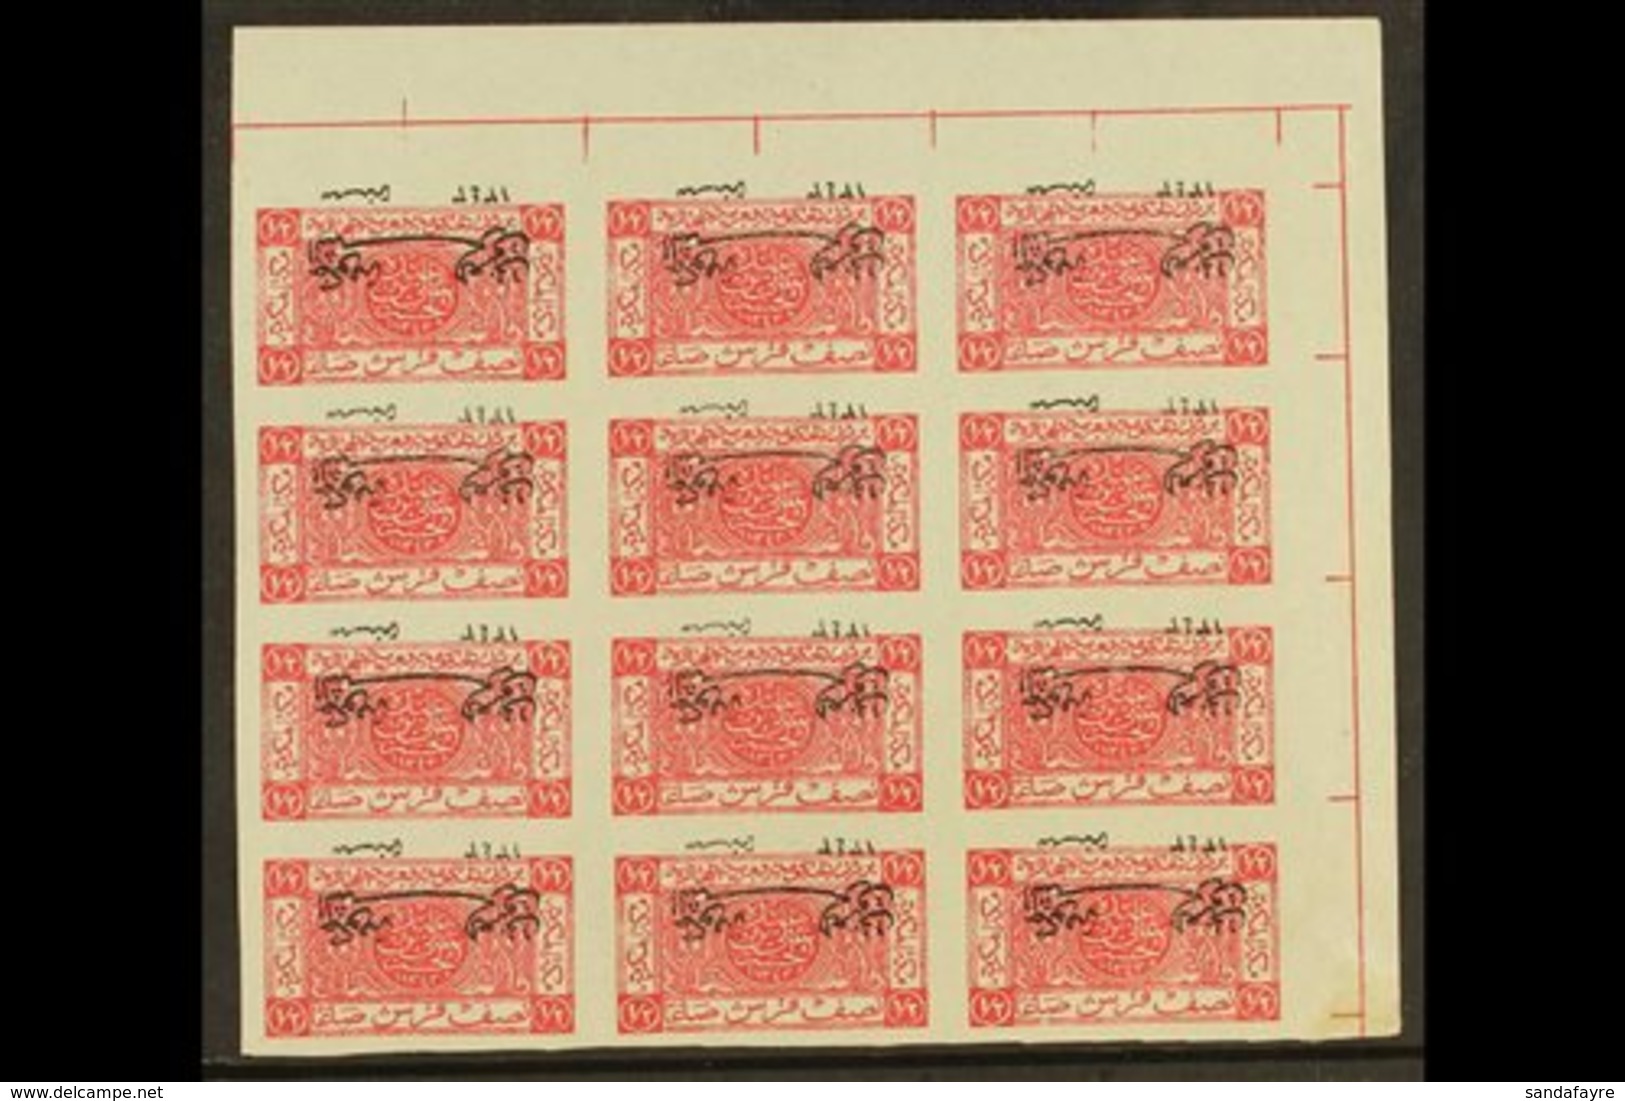 1925 2 Aug) ½p Carmine IMPERF WITH INVERTED OVERPRINT Variety, As SG 137a, Fine Never Hinged Mint Upper Right Marginal B - Jordanie